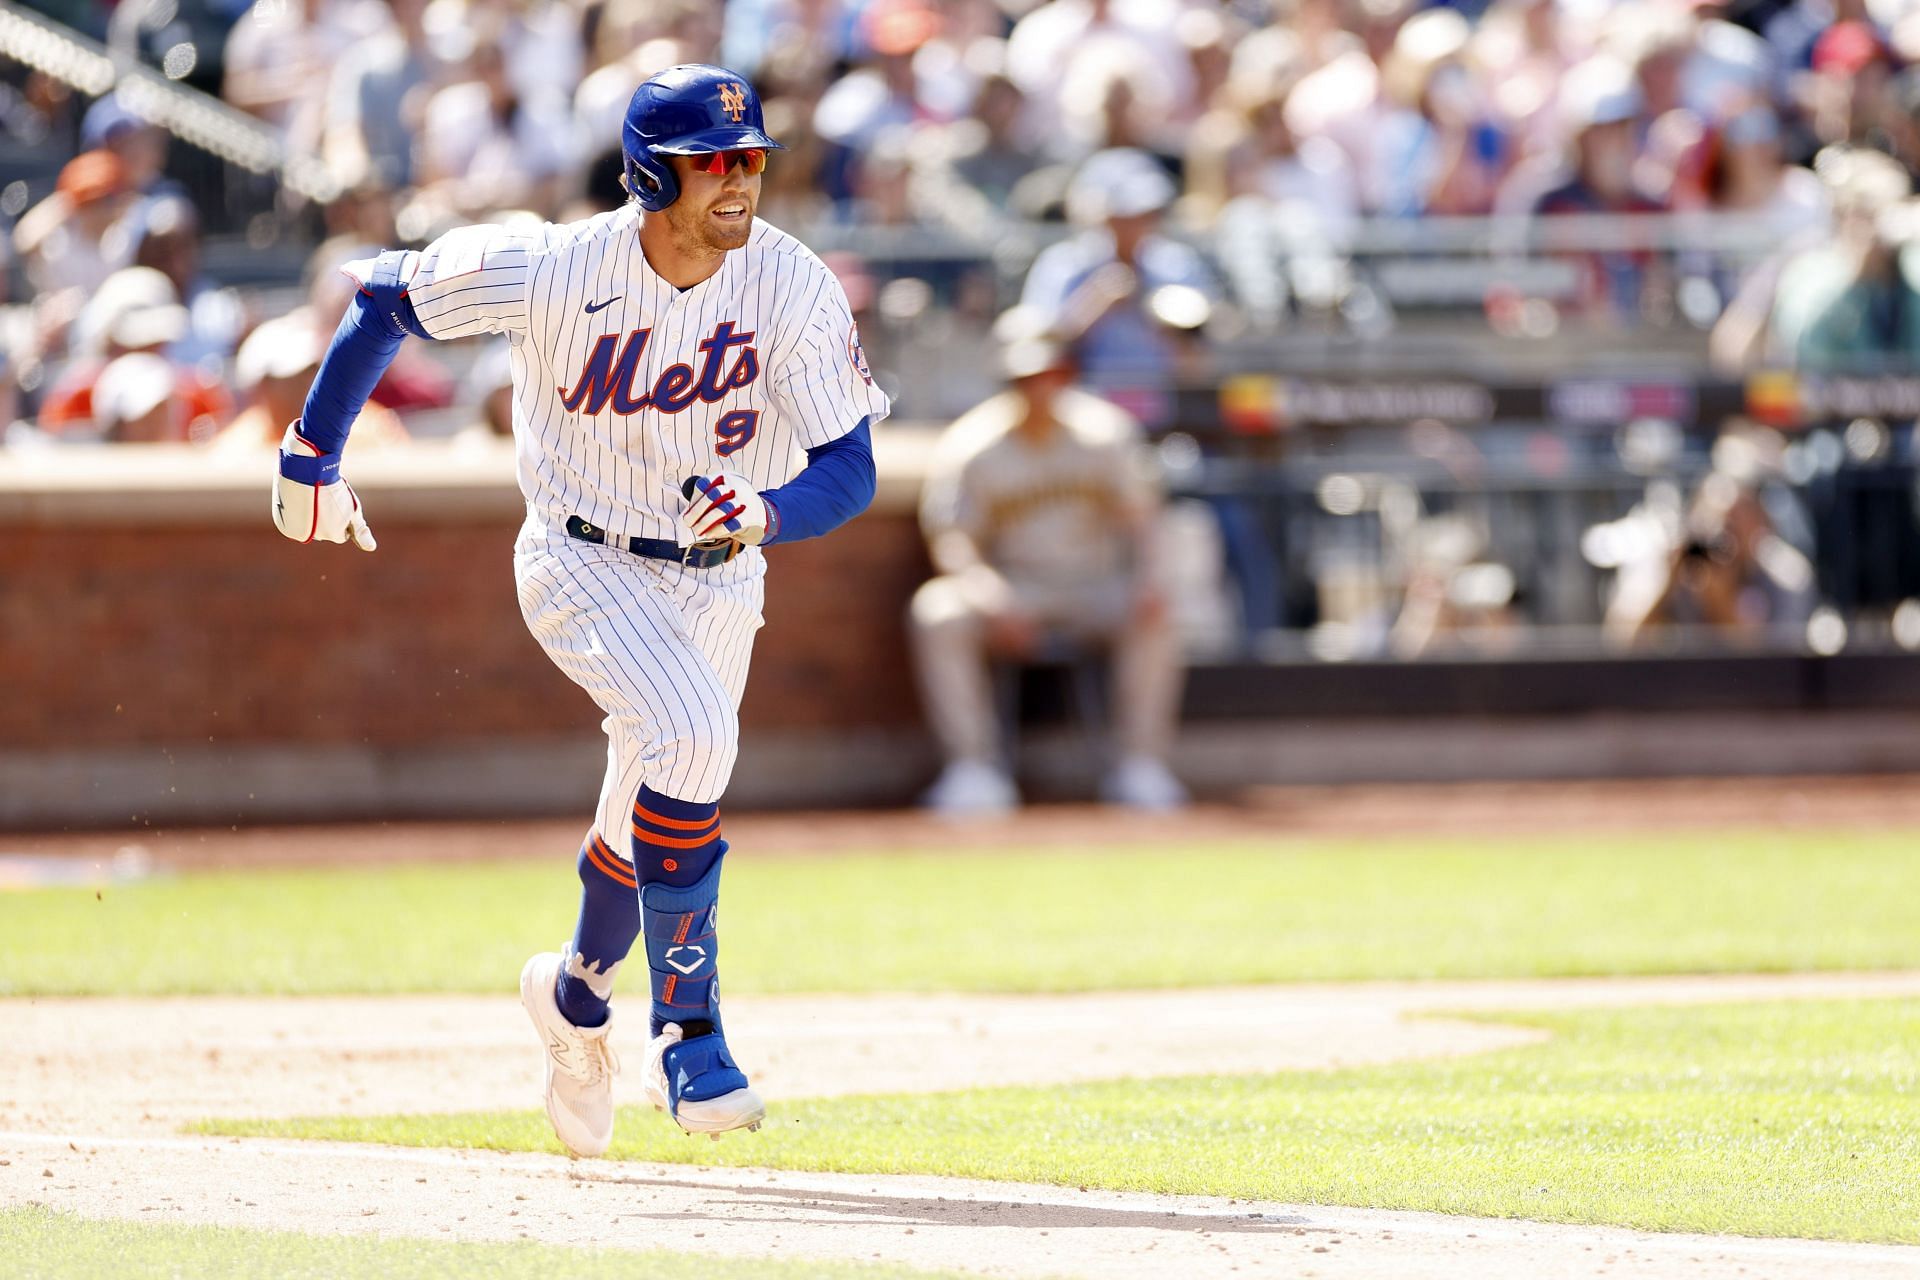 Mets outfielder Brandon Nimmo should have been an All-Star - Amazin' Avenue